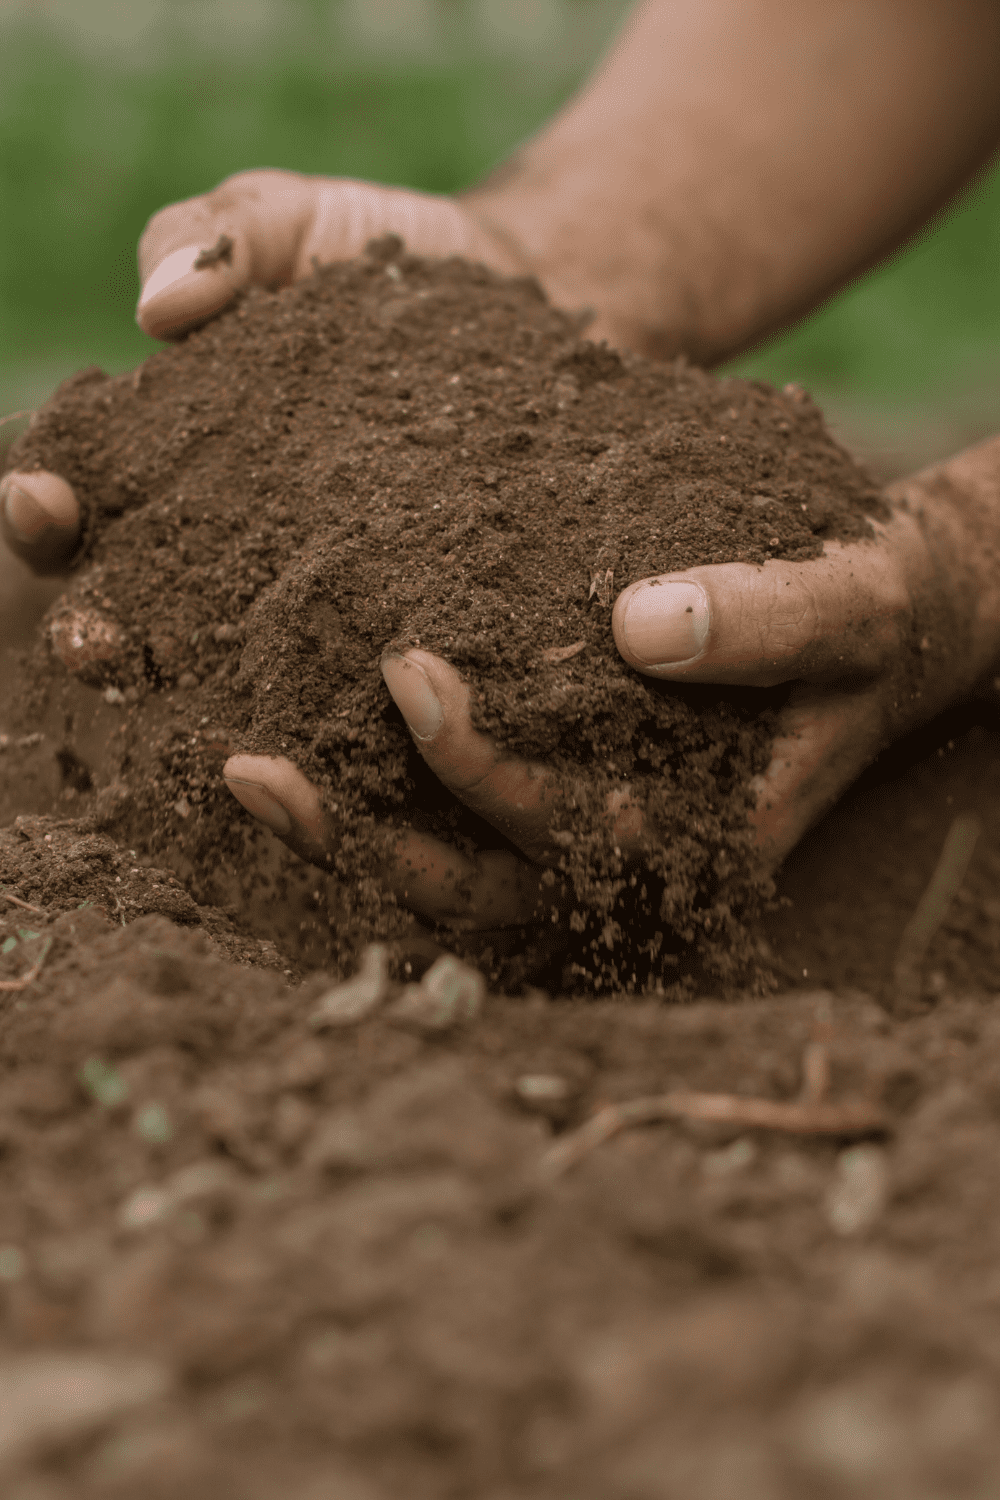 hands digging and holding soil